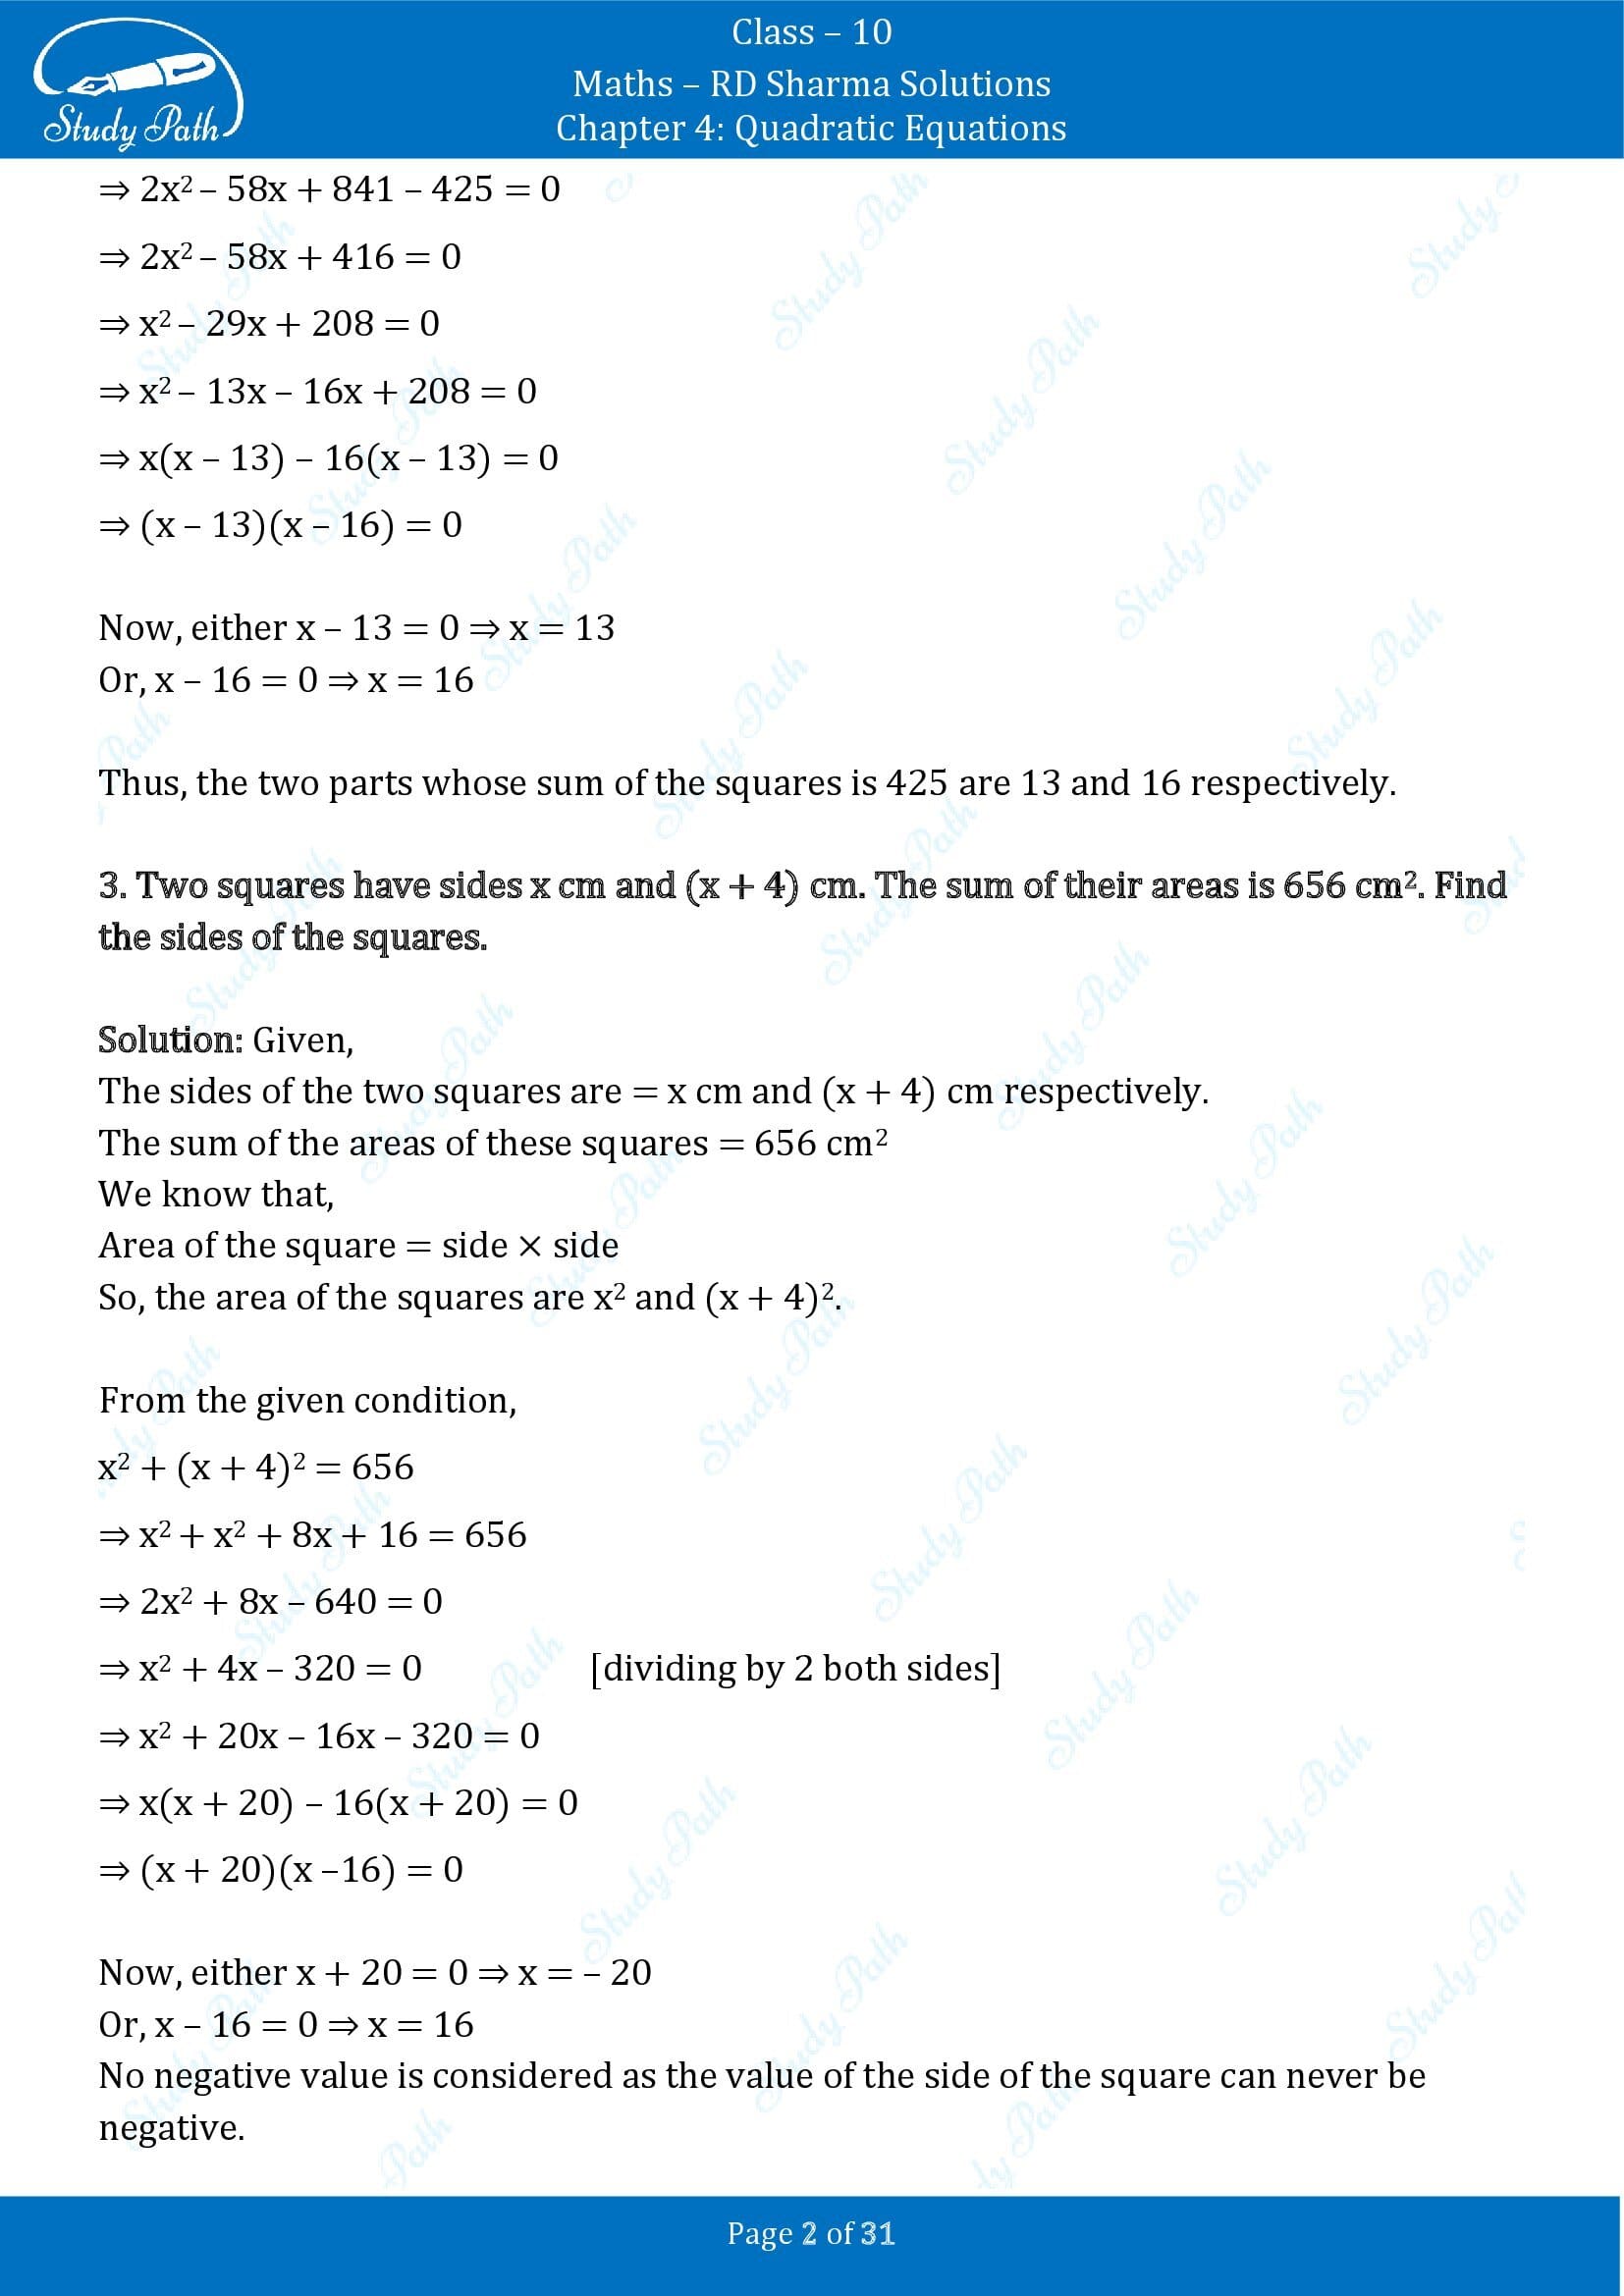 RD Sharma Solutions Class 10 Chapter 4 Quadratic Equations Exercise 4.7 00002